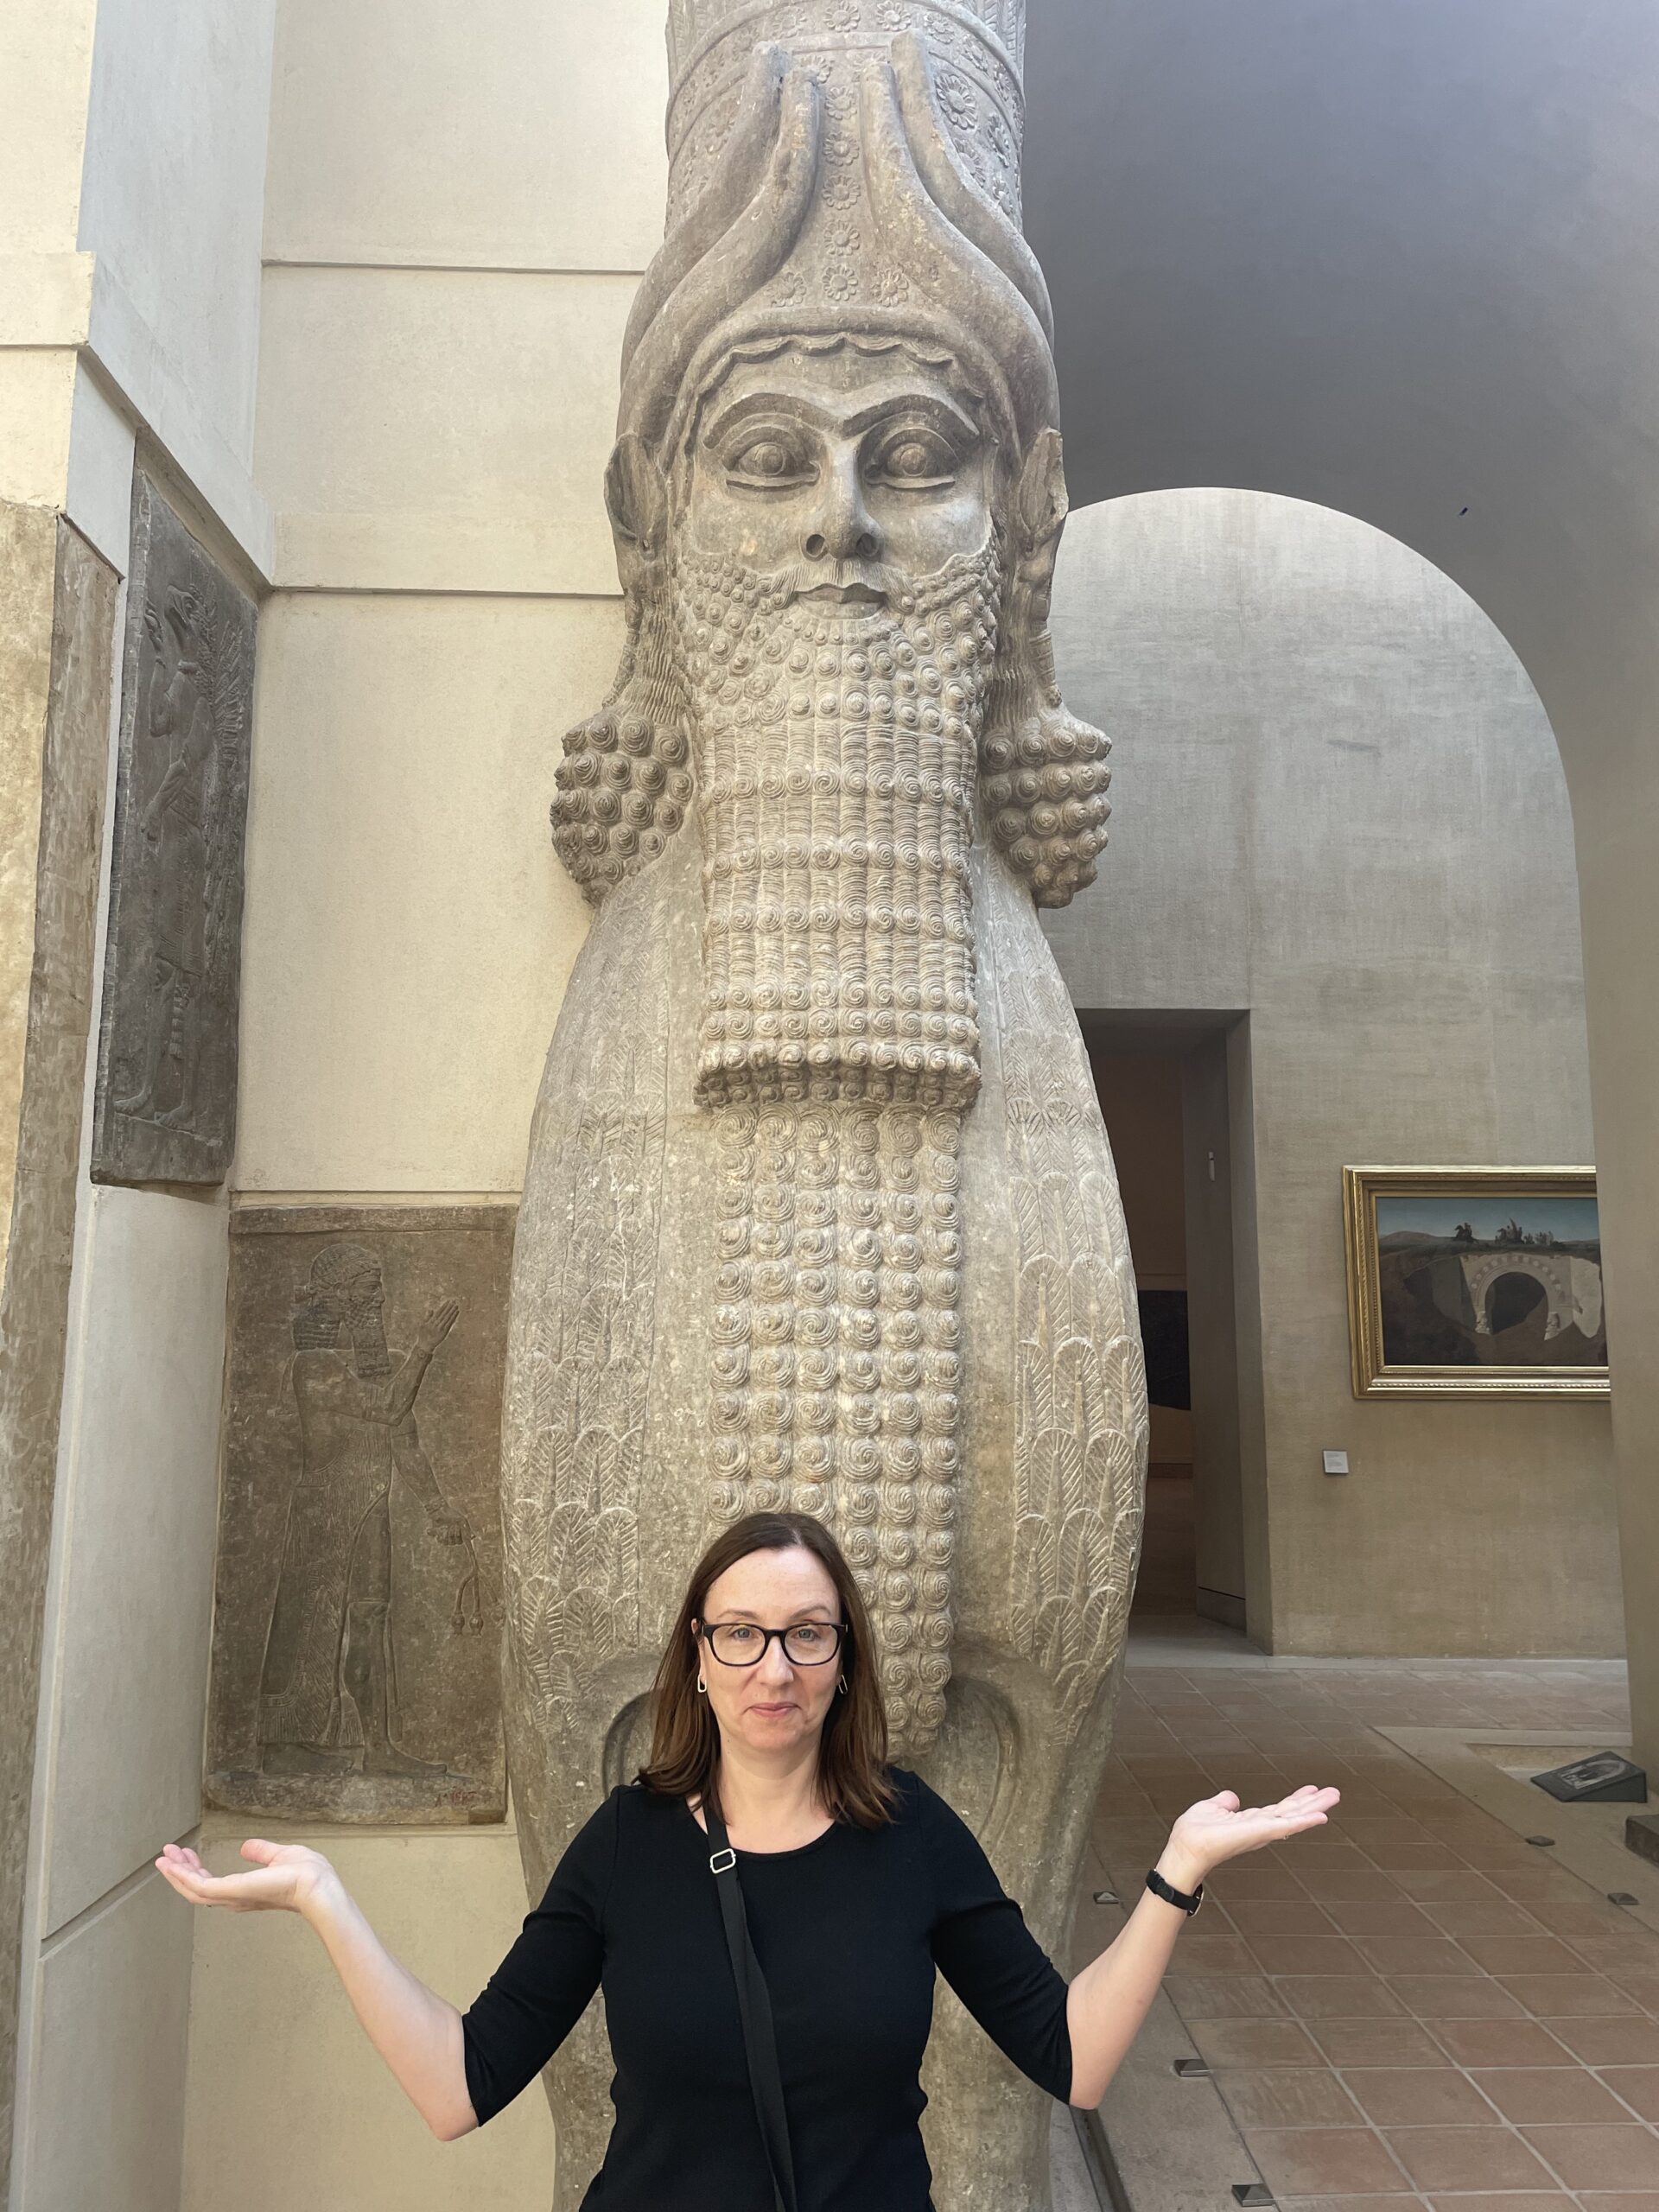 Author with Egyptian statue, hands open